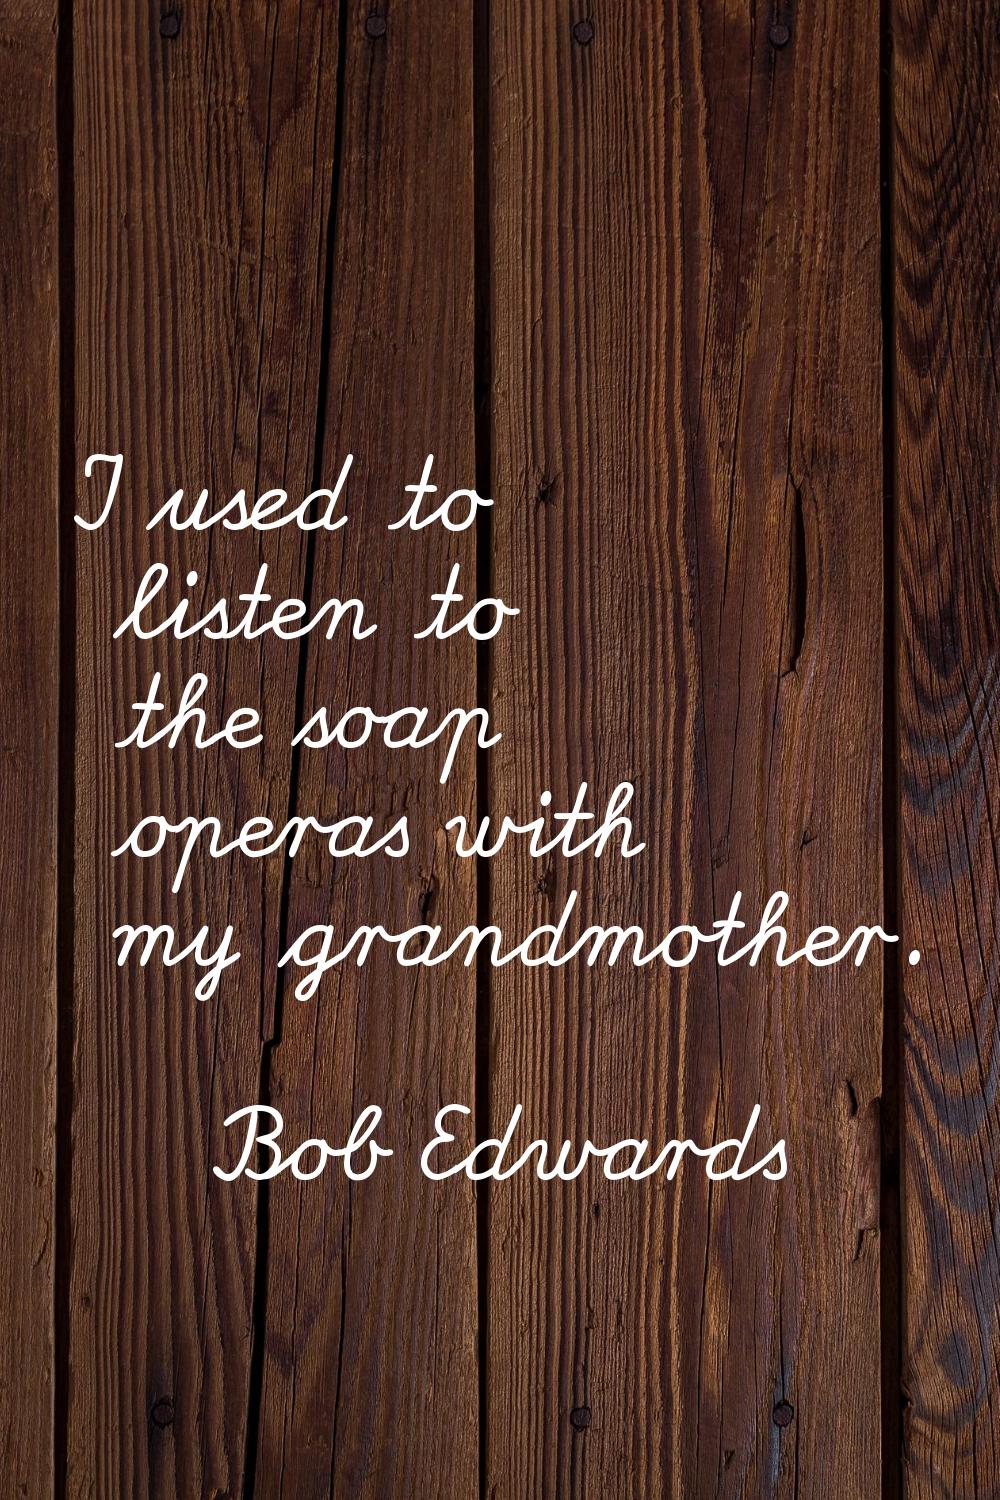 I used to listen to the soap operas with my grandmother.